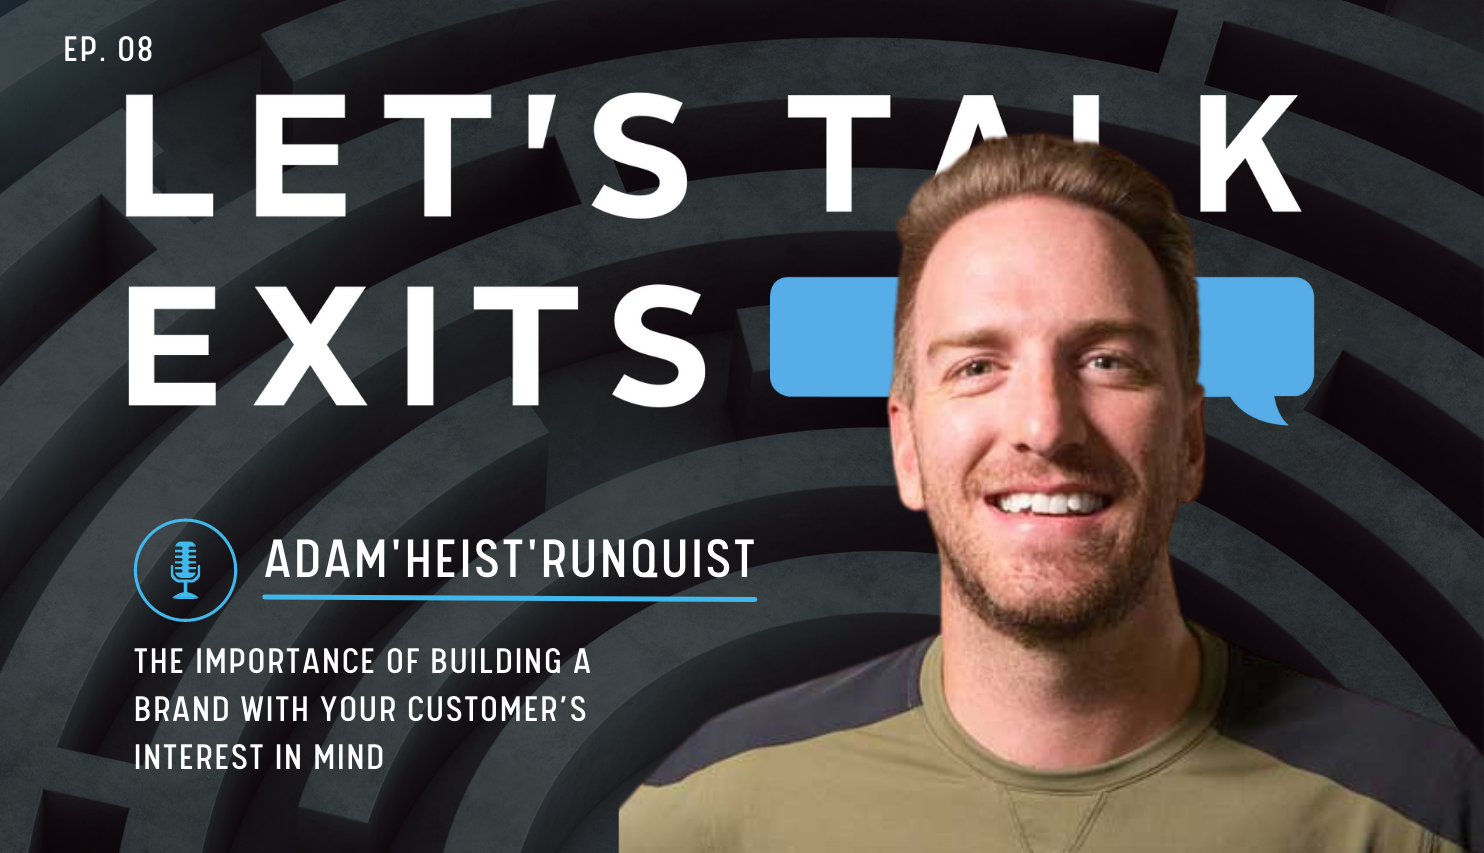 The Importance of Building a Brand with Your Customer's Interest in Mind with Adam "Heist" Runquist